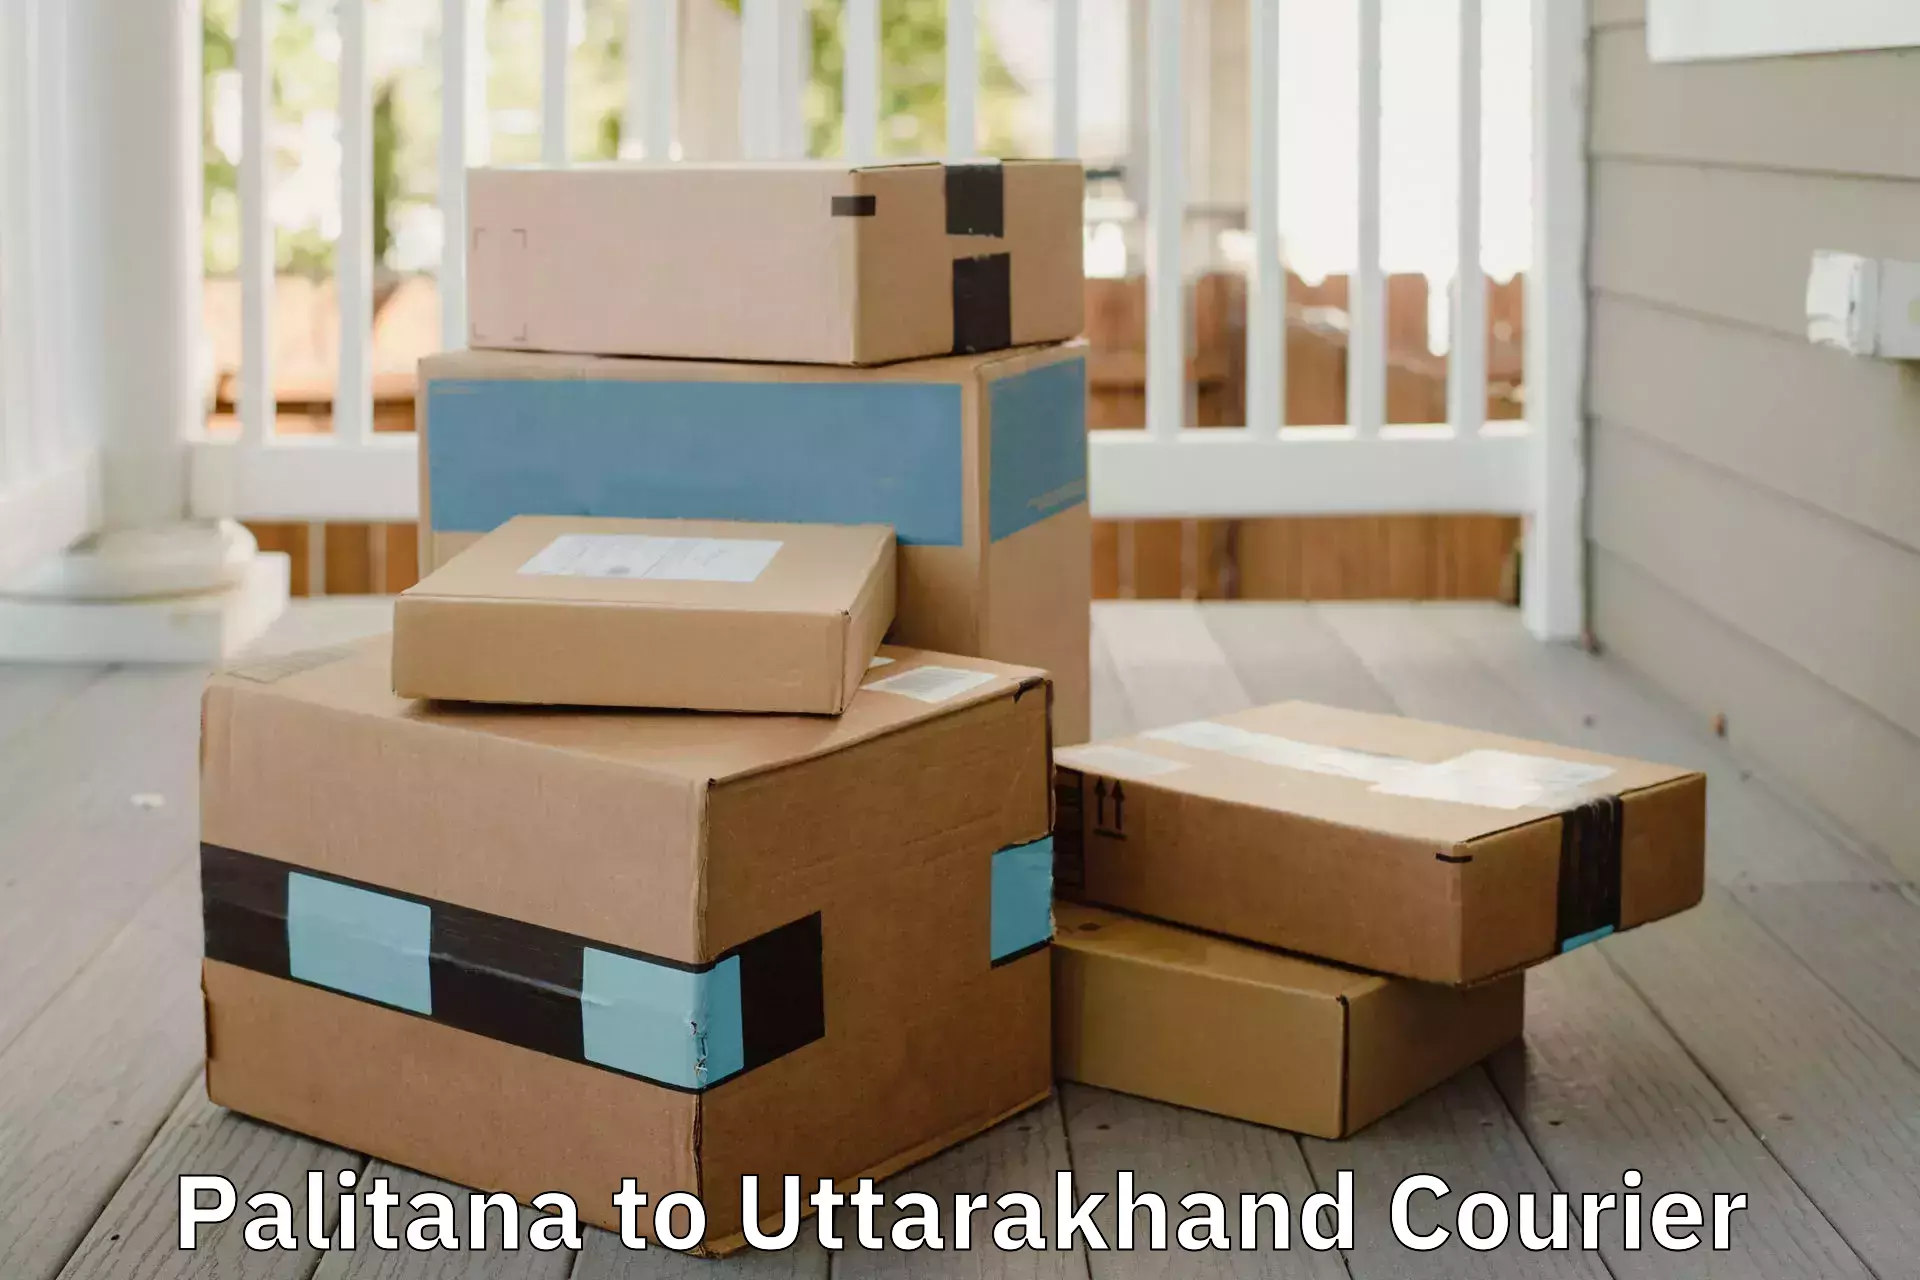 Quality relocation services in Palitana to Uttarakhand